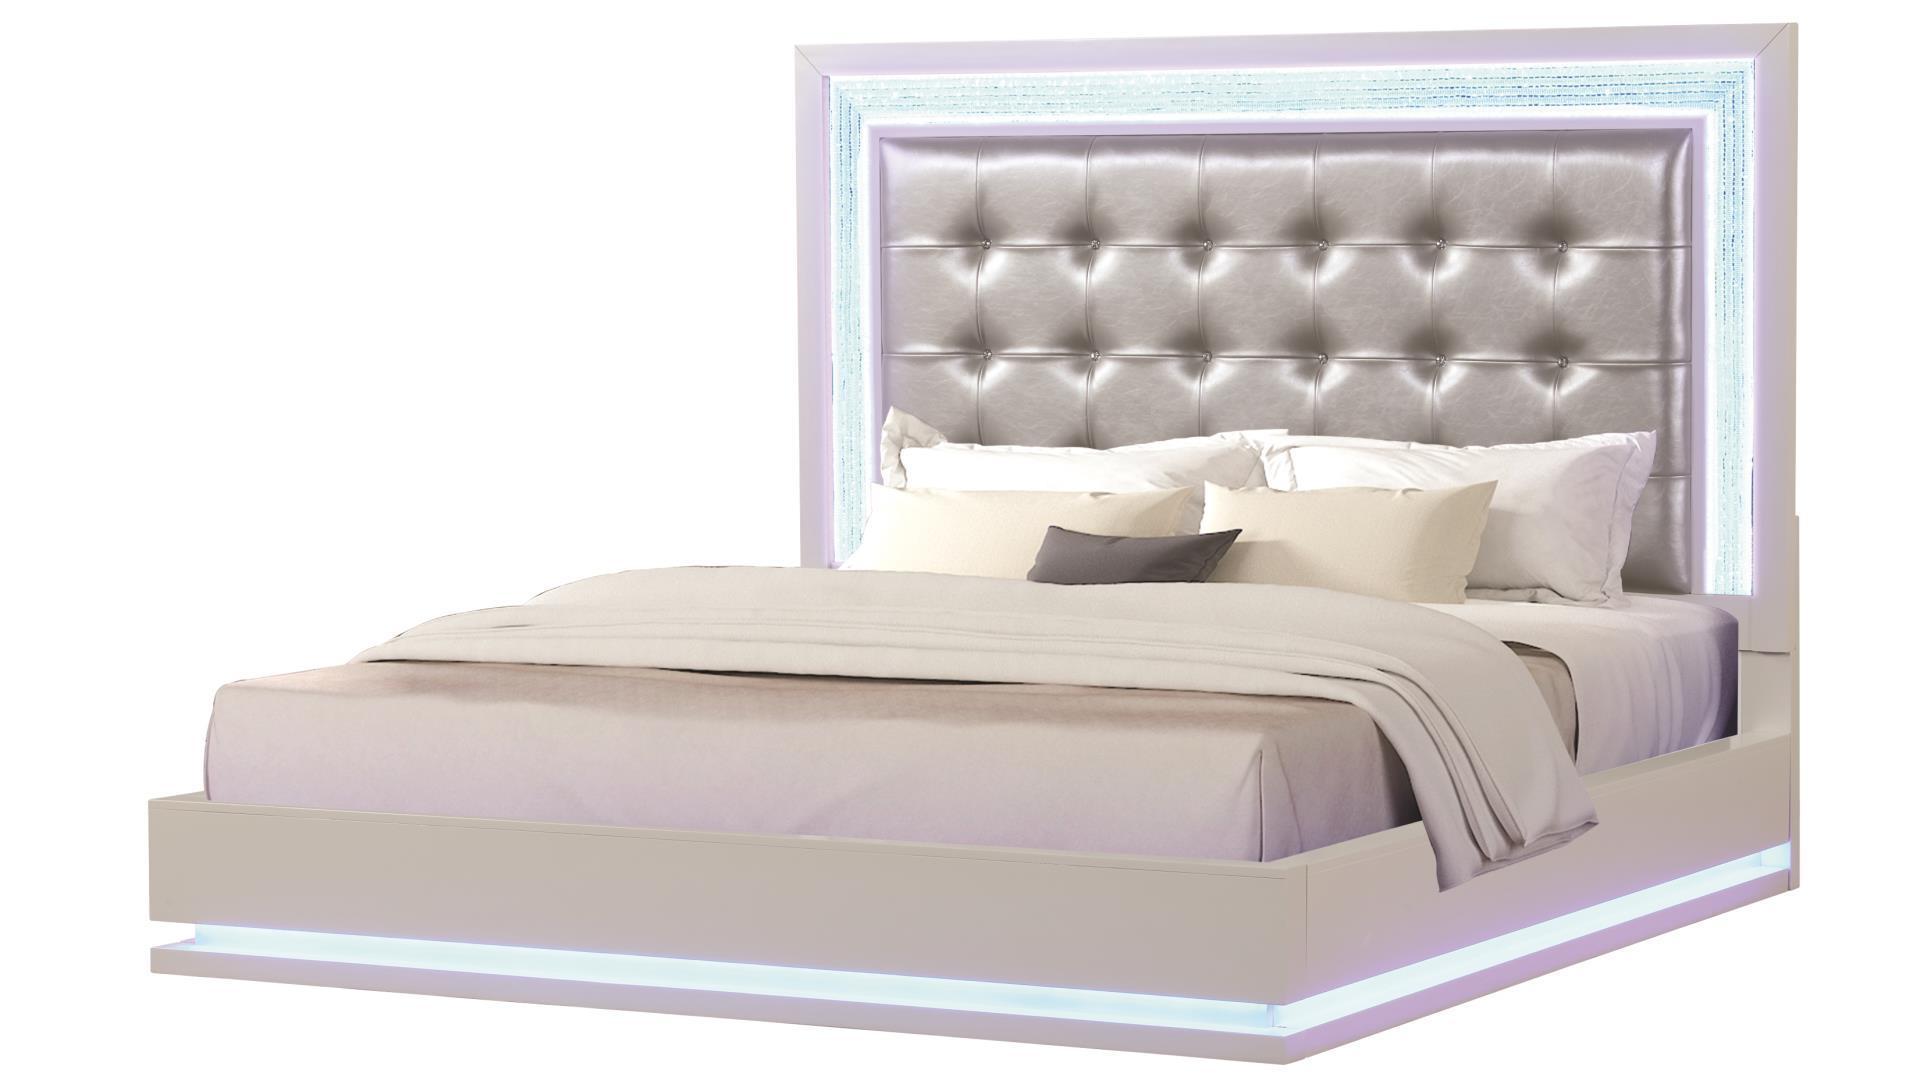 

    
Milky White Tufted Queen Led Bedroom Set 5P PASSION Galaxy Home Contemporary
